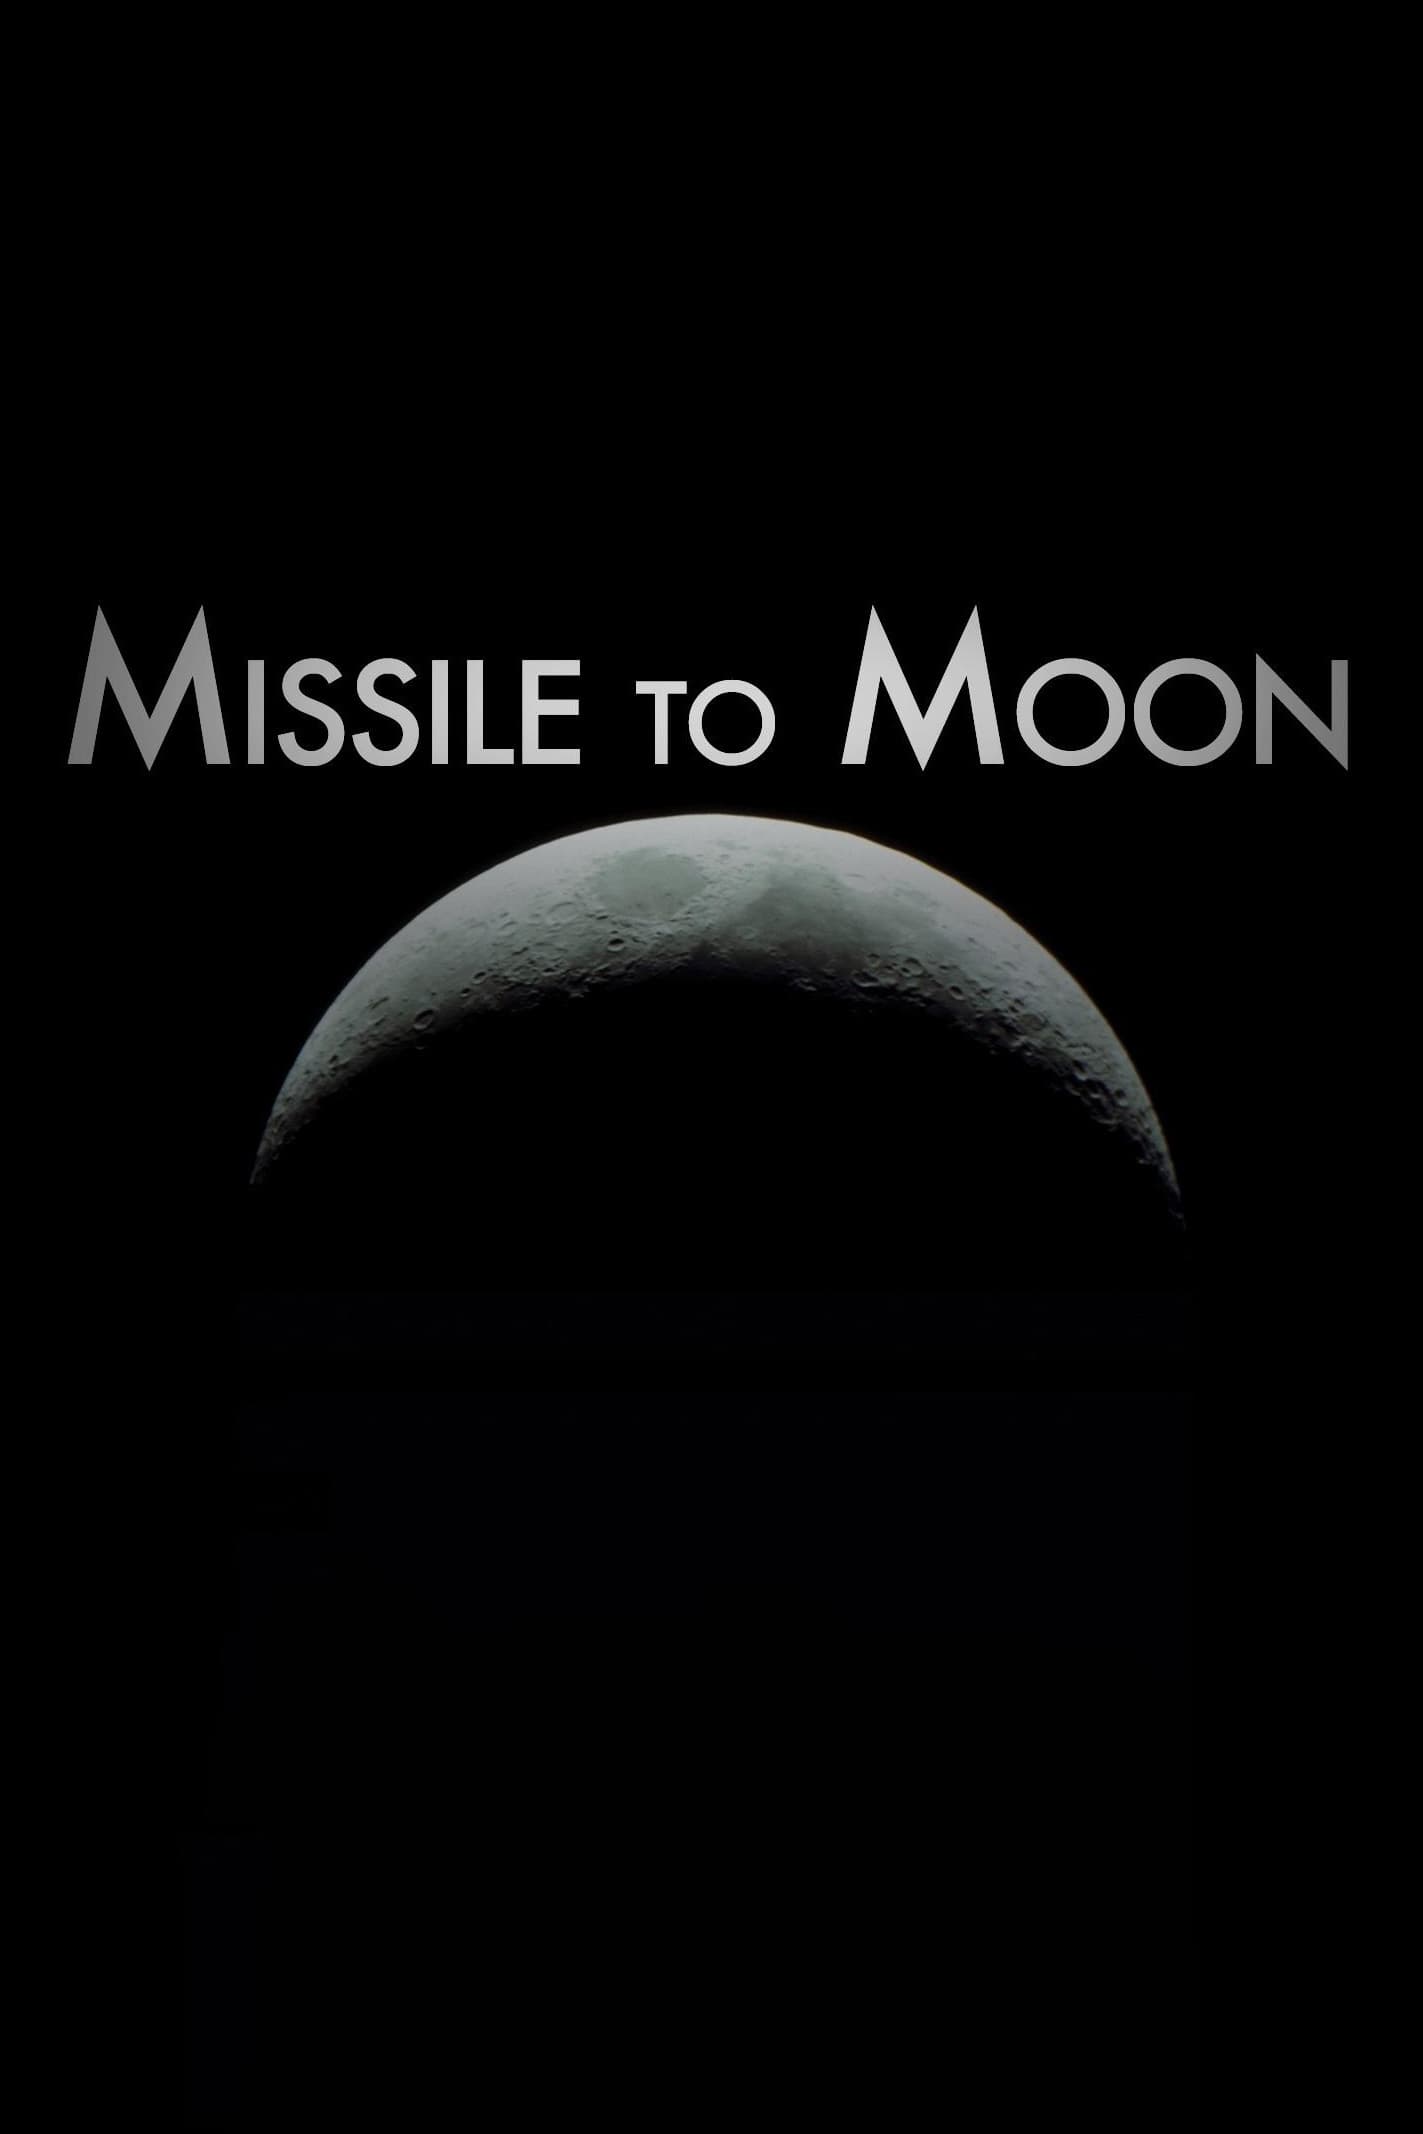 Missile to Moon